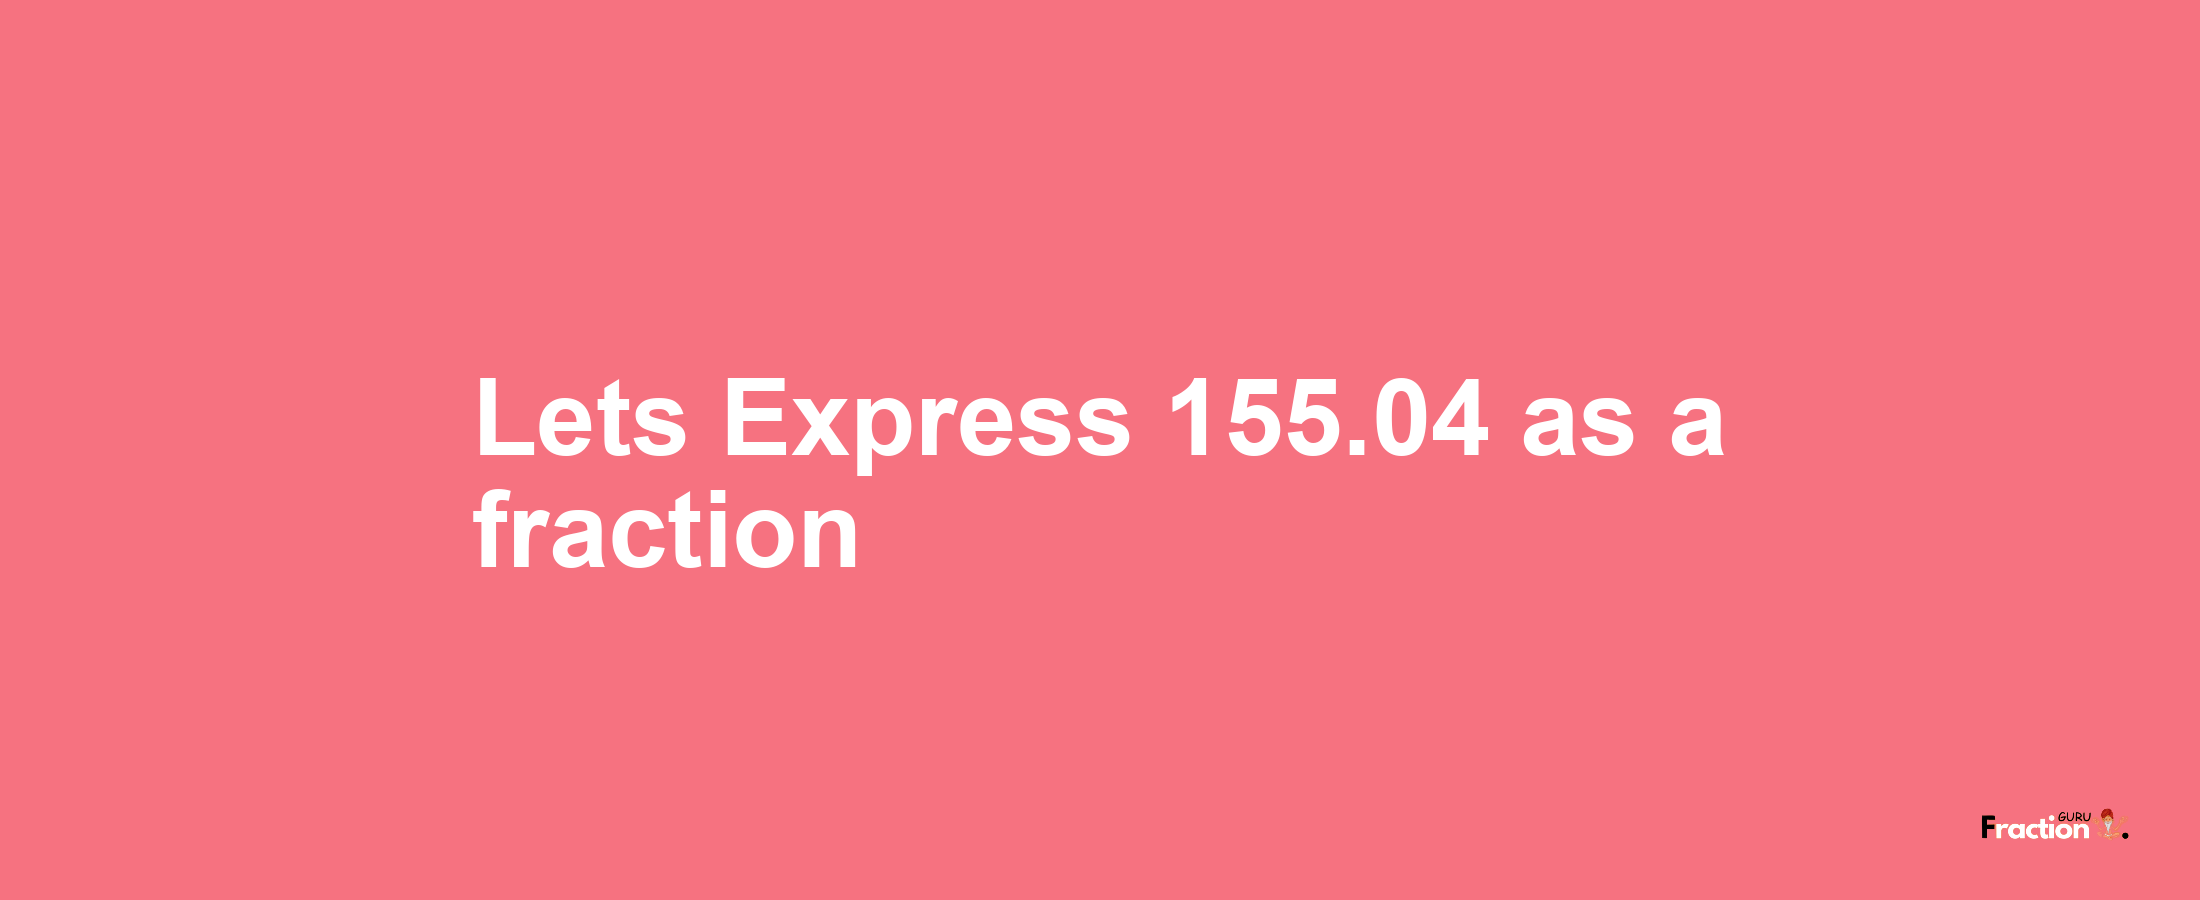 Lets Express 155.04 as afraction